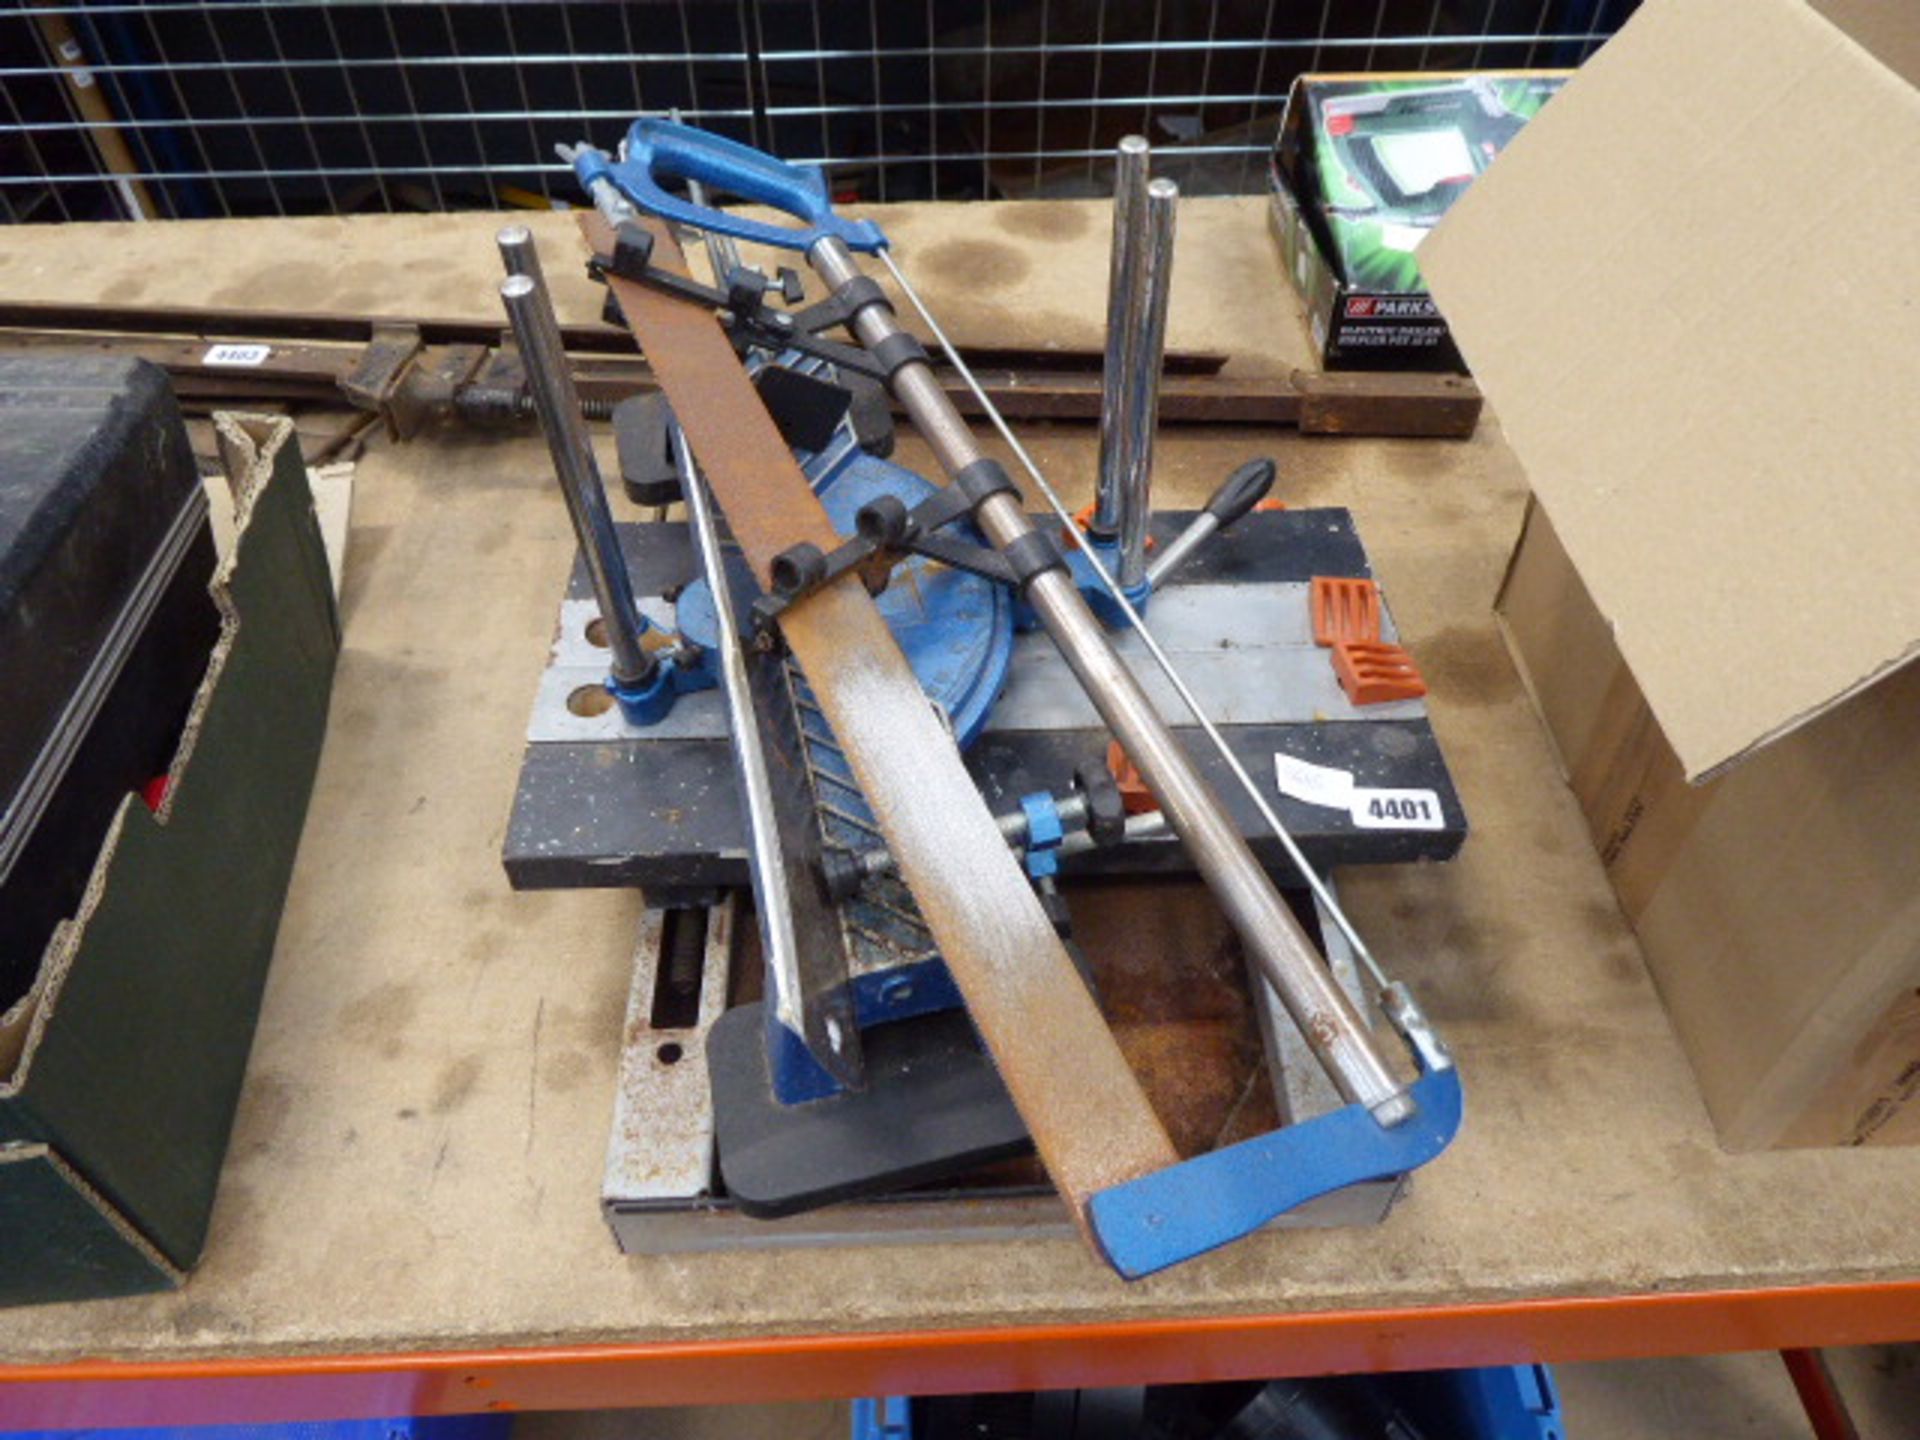 Small jobber, work bench and mitre saw